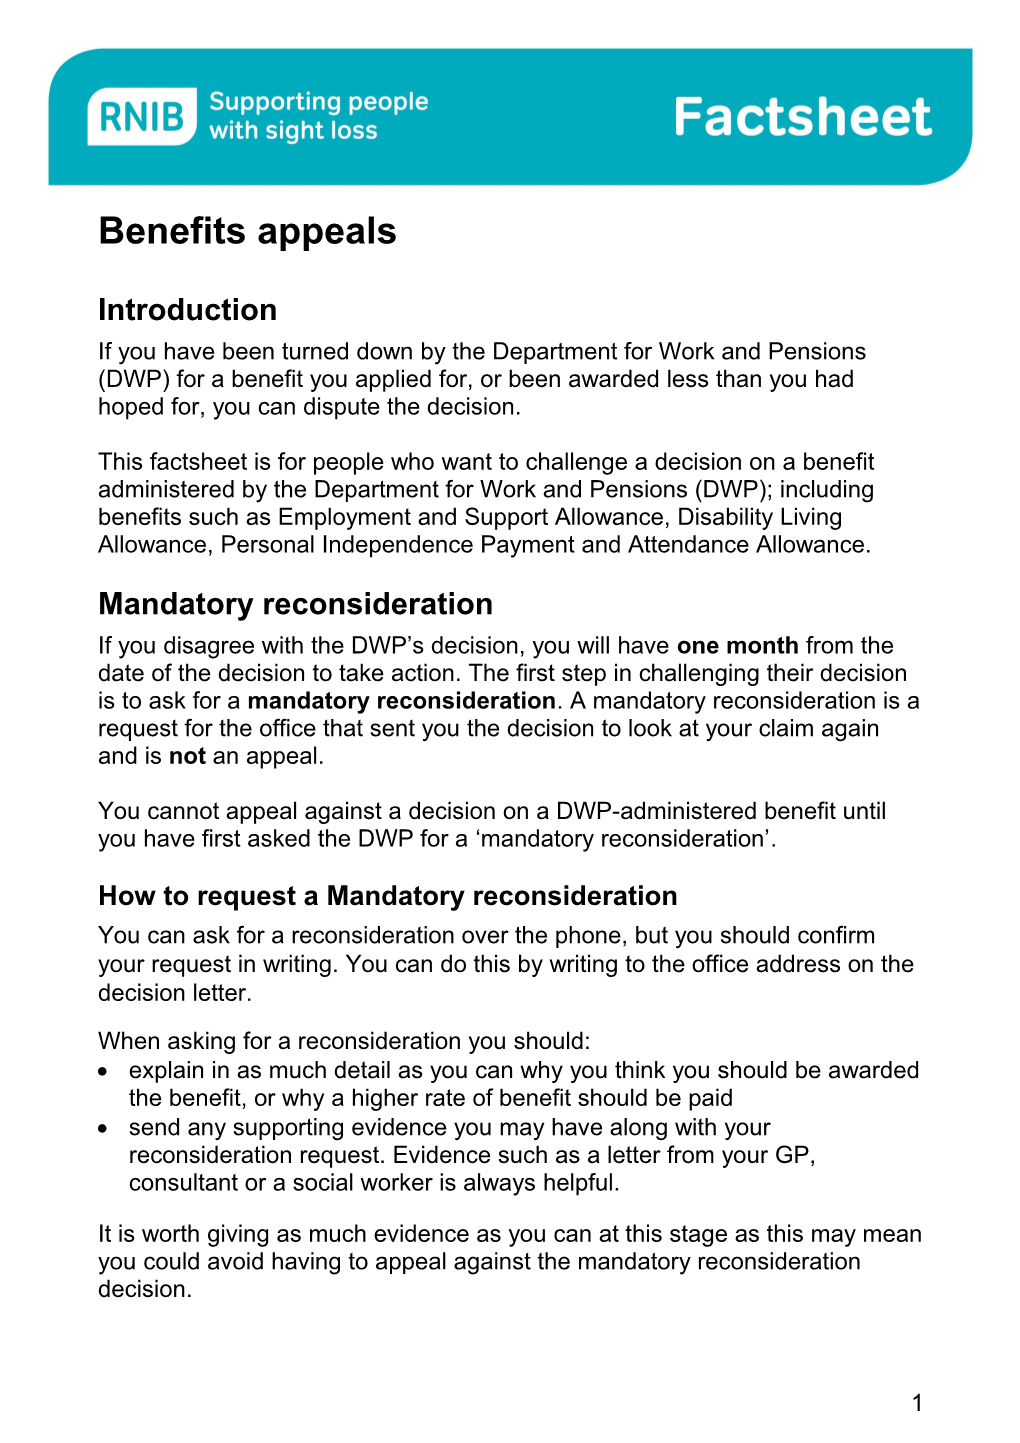 Benefits Appeals 2014-15 (For Benefit Decisions Made After 28 October 2013)